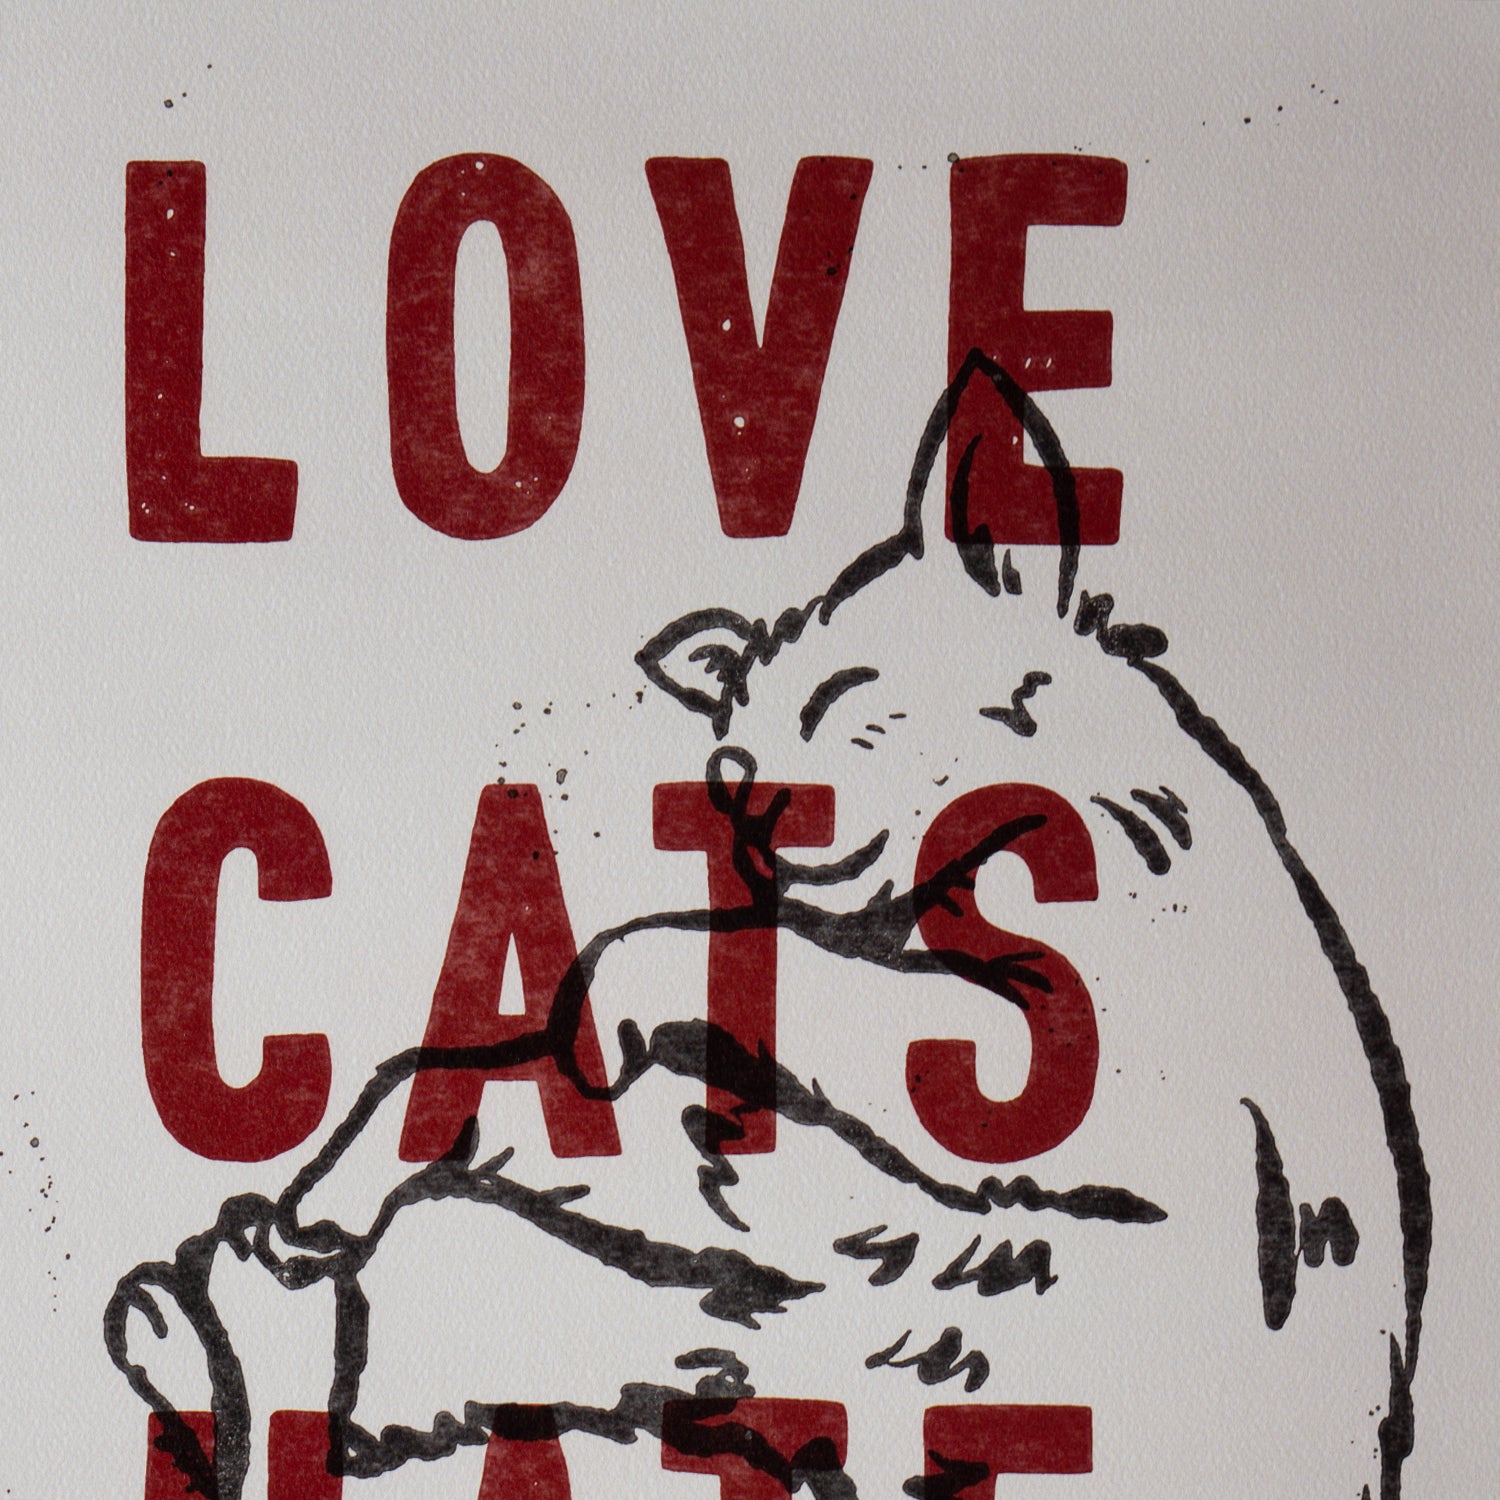 Love Cats Hate Racism Print A3